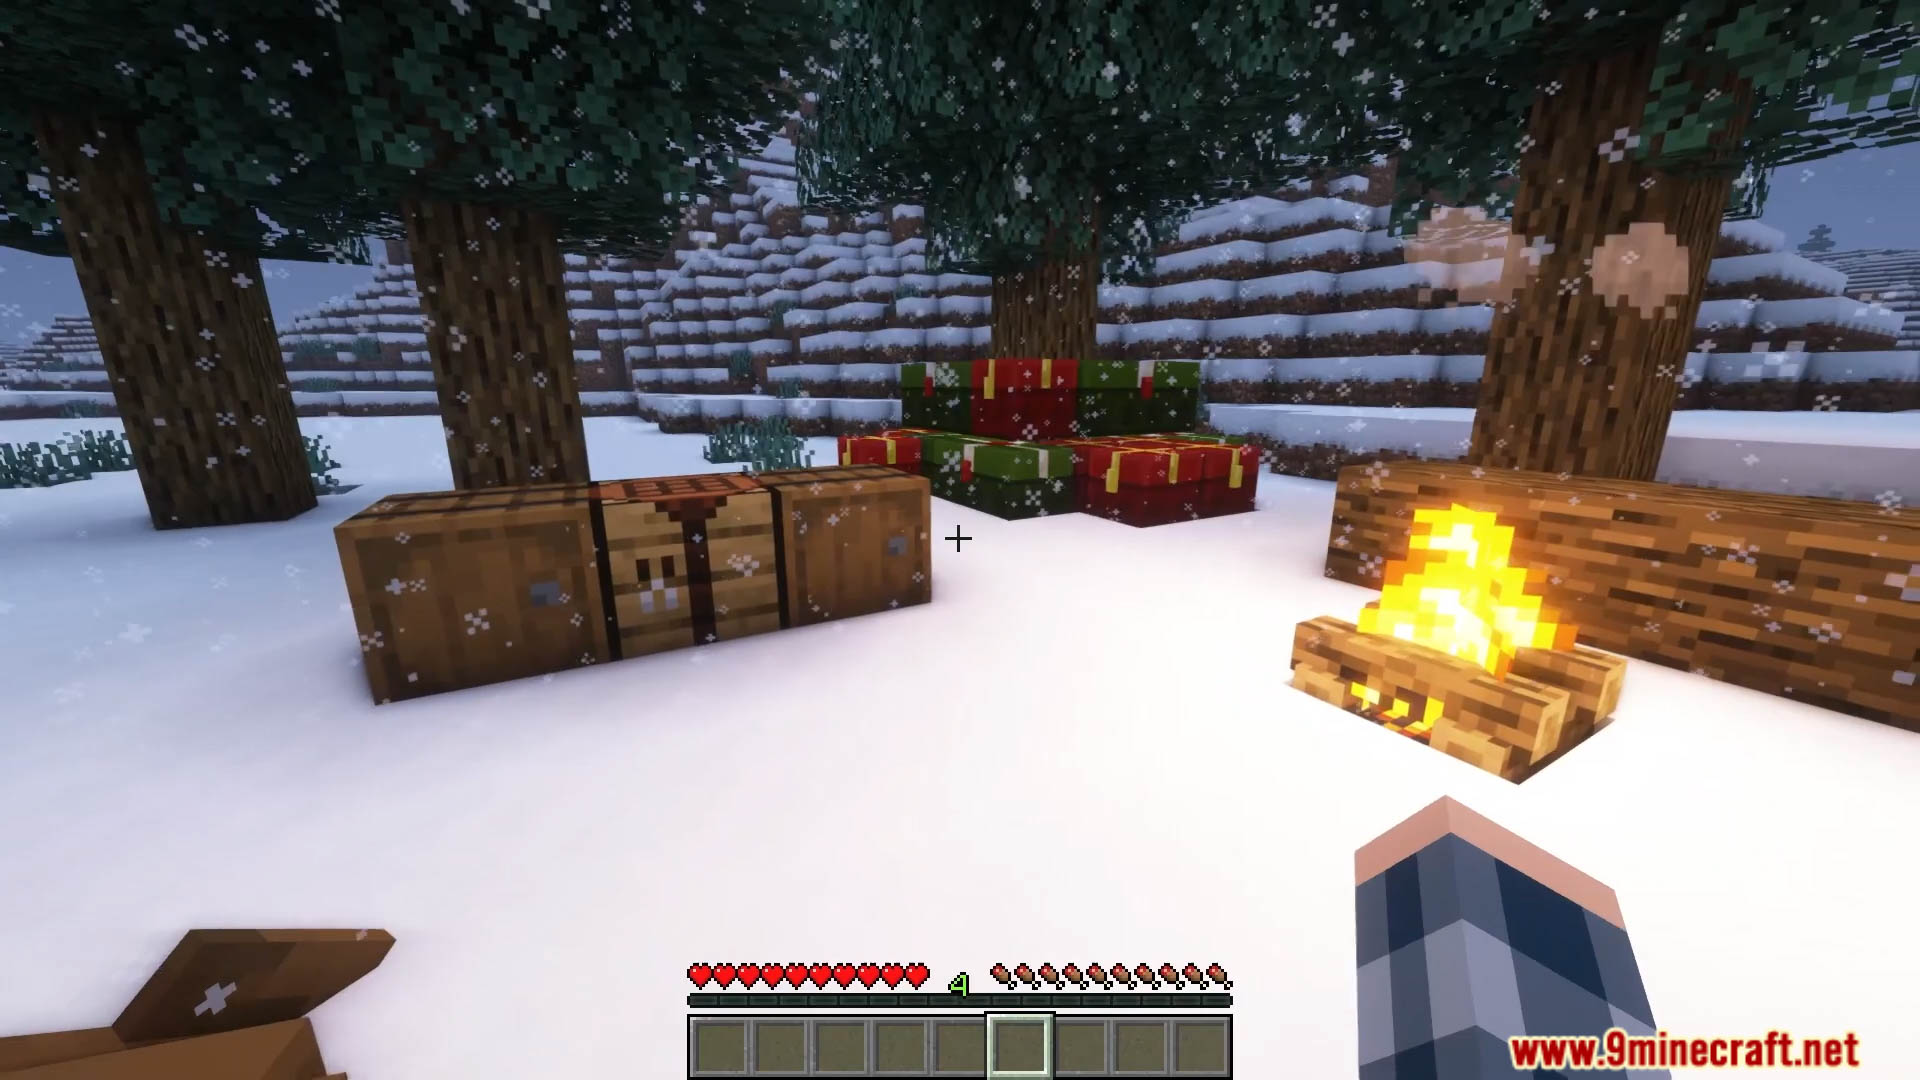 Christmas Spirit Data Pack (1.20.4, 1.19.4) - Infuse Your Minecraft World with Festive Magic! 5